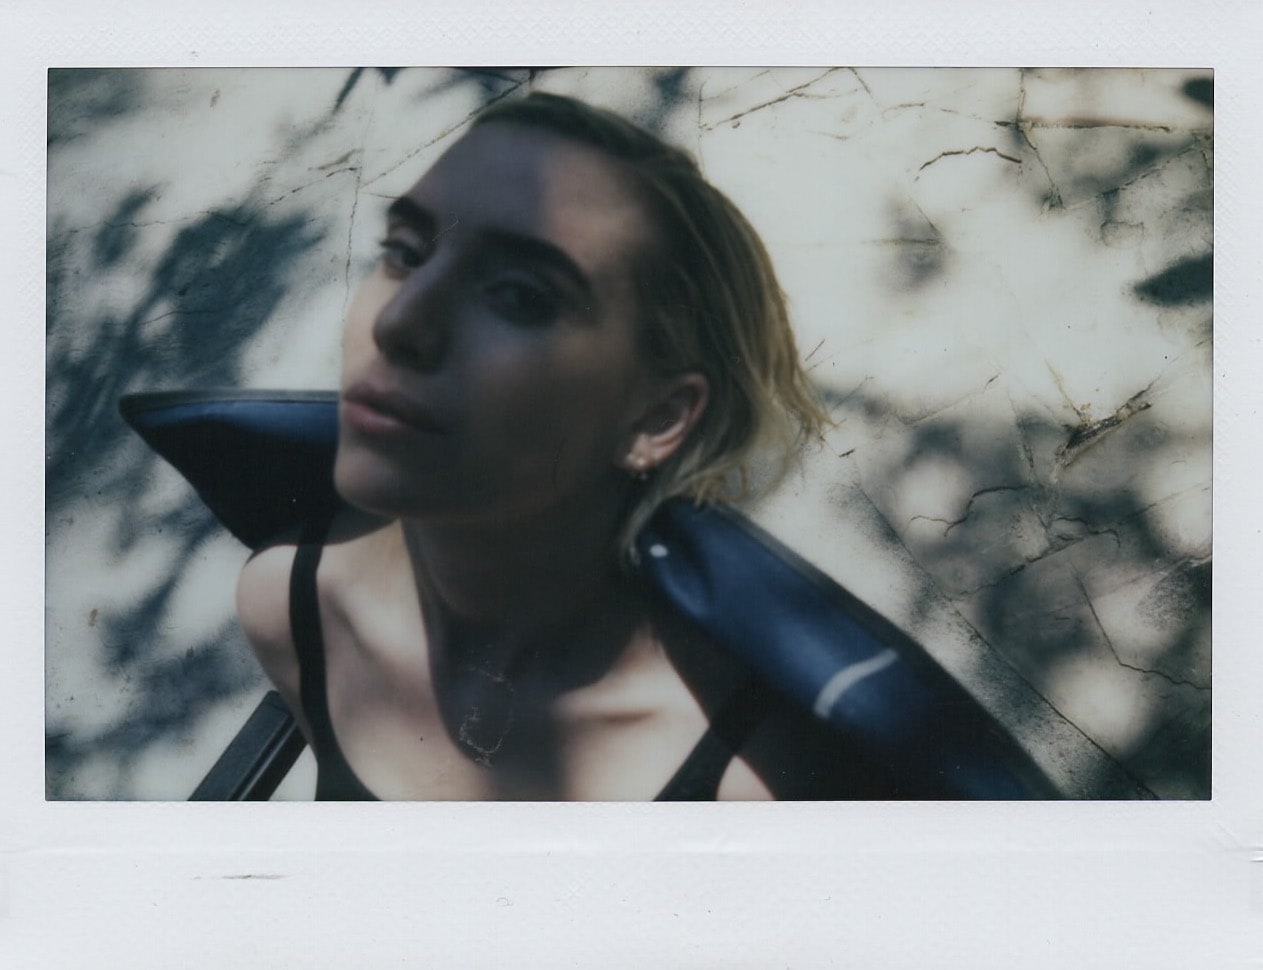 The world is nuts, so Lykke Li is surviving by being honest